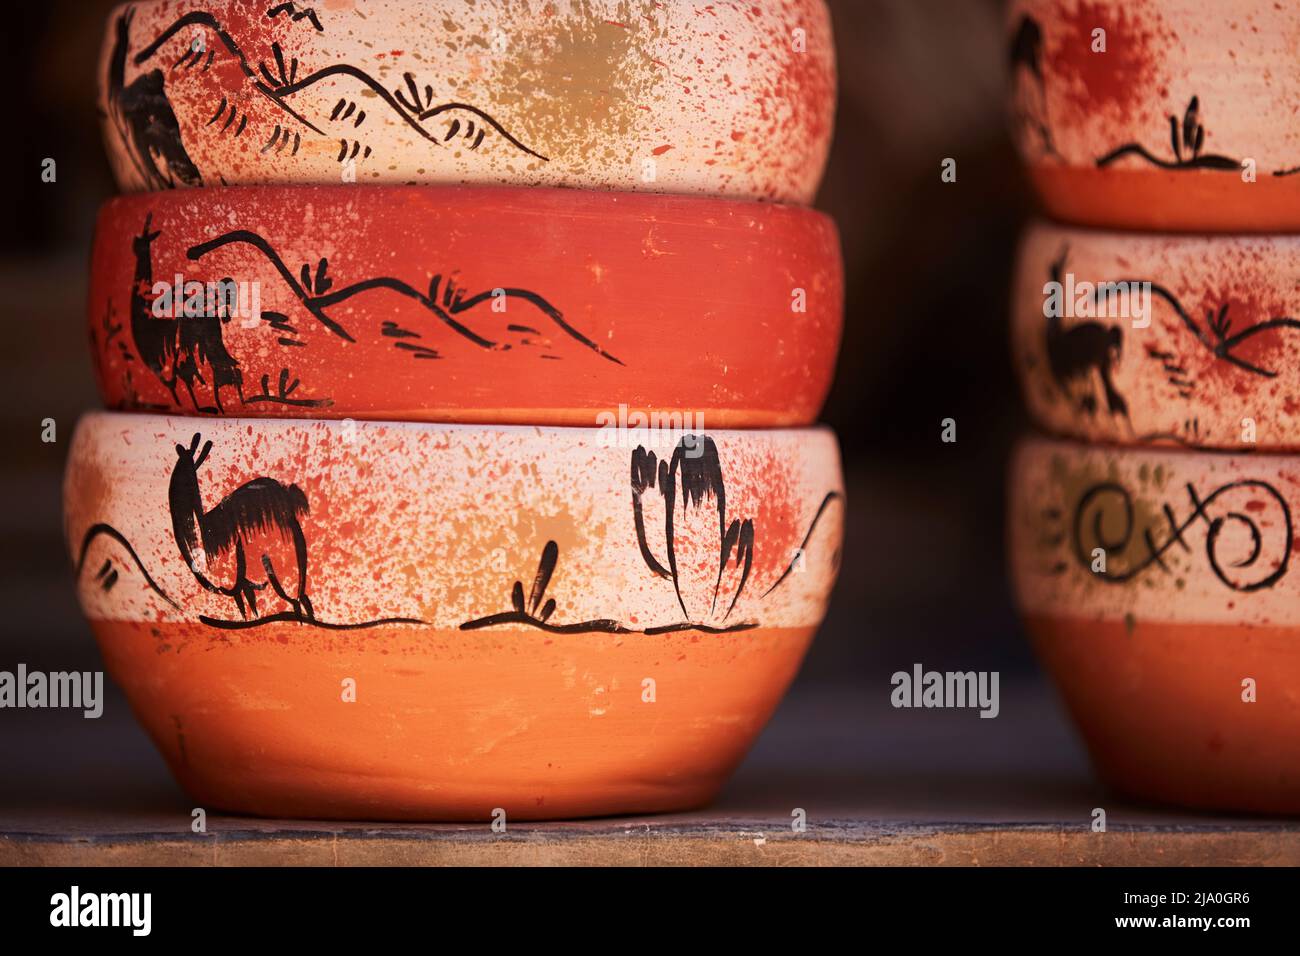 Detail of handmade terracotta pots on sale in a street stand in the Humahuaca historical cask, Jujuy province, Argentina. Stock Photo